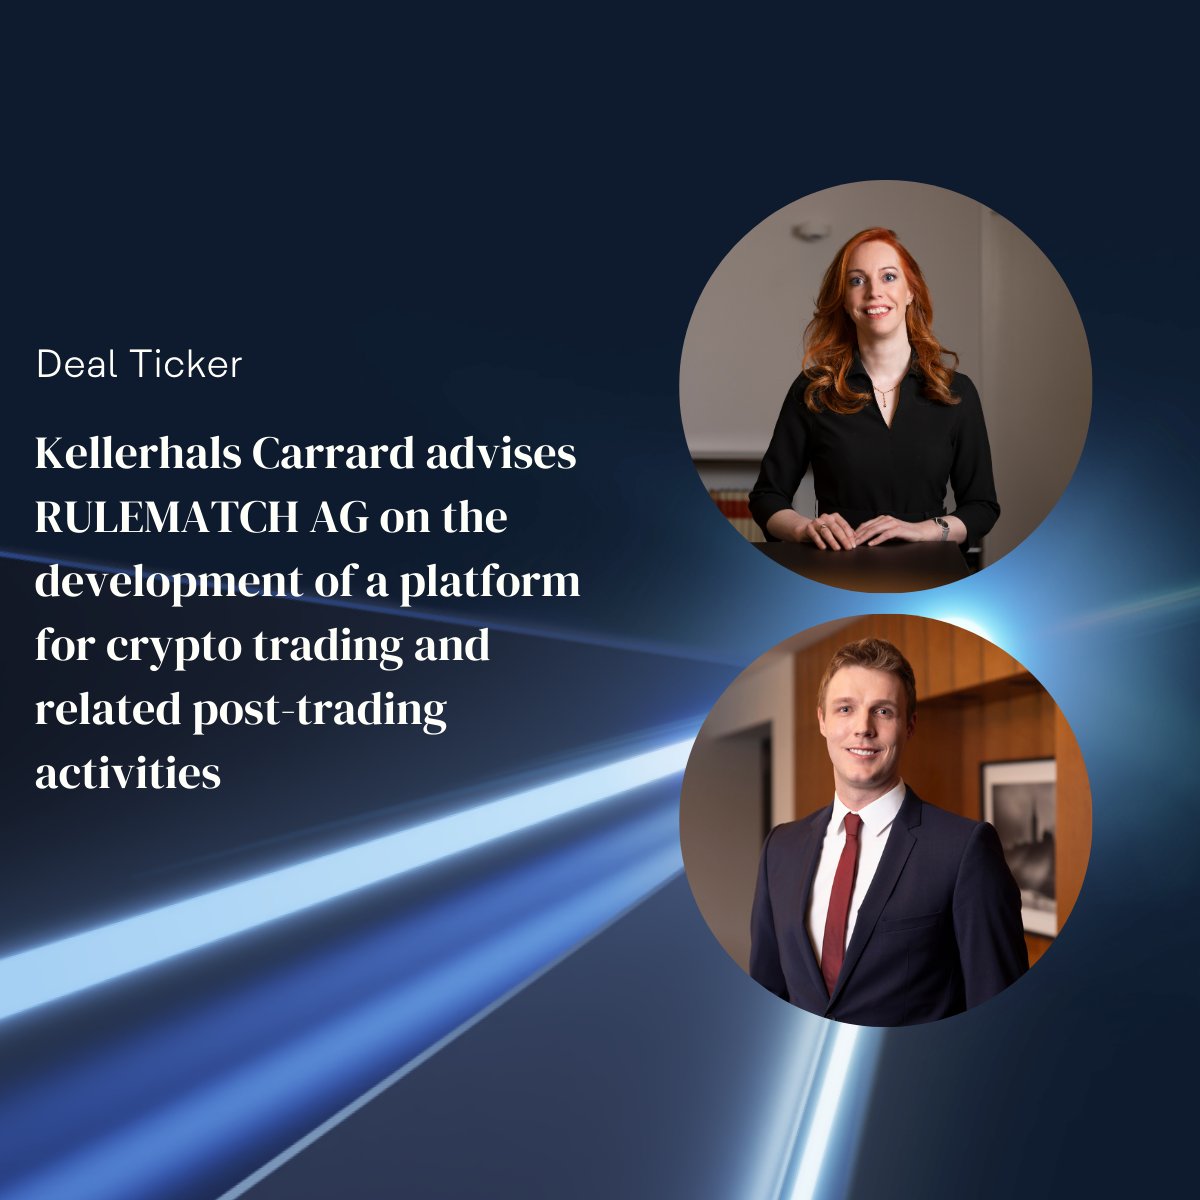 @StengelCornelia and Manuel Brogli advise RULEMATCH AG on financial market and contract law matters and represent @rulematch before the Swiss Financial Market Supervisory Authority FINMA. bit.ly/3NqxC8K #ThisIsKellerhalsCarrard